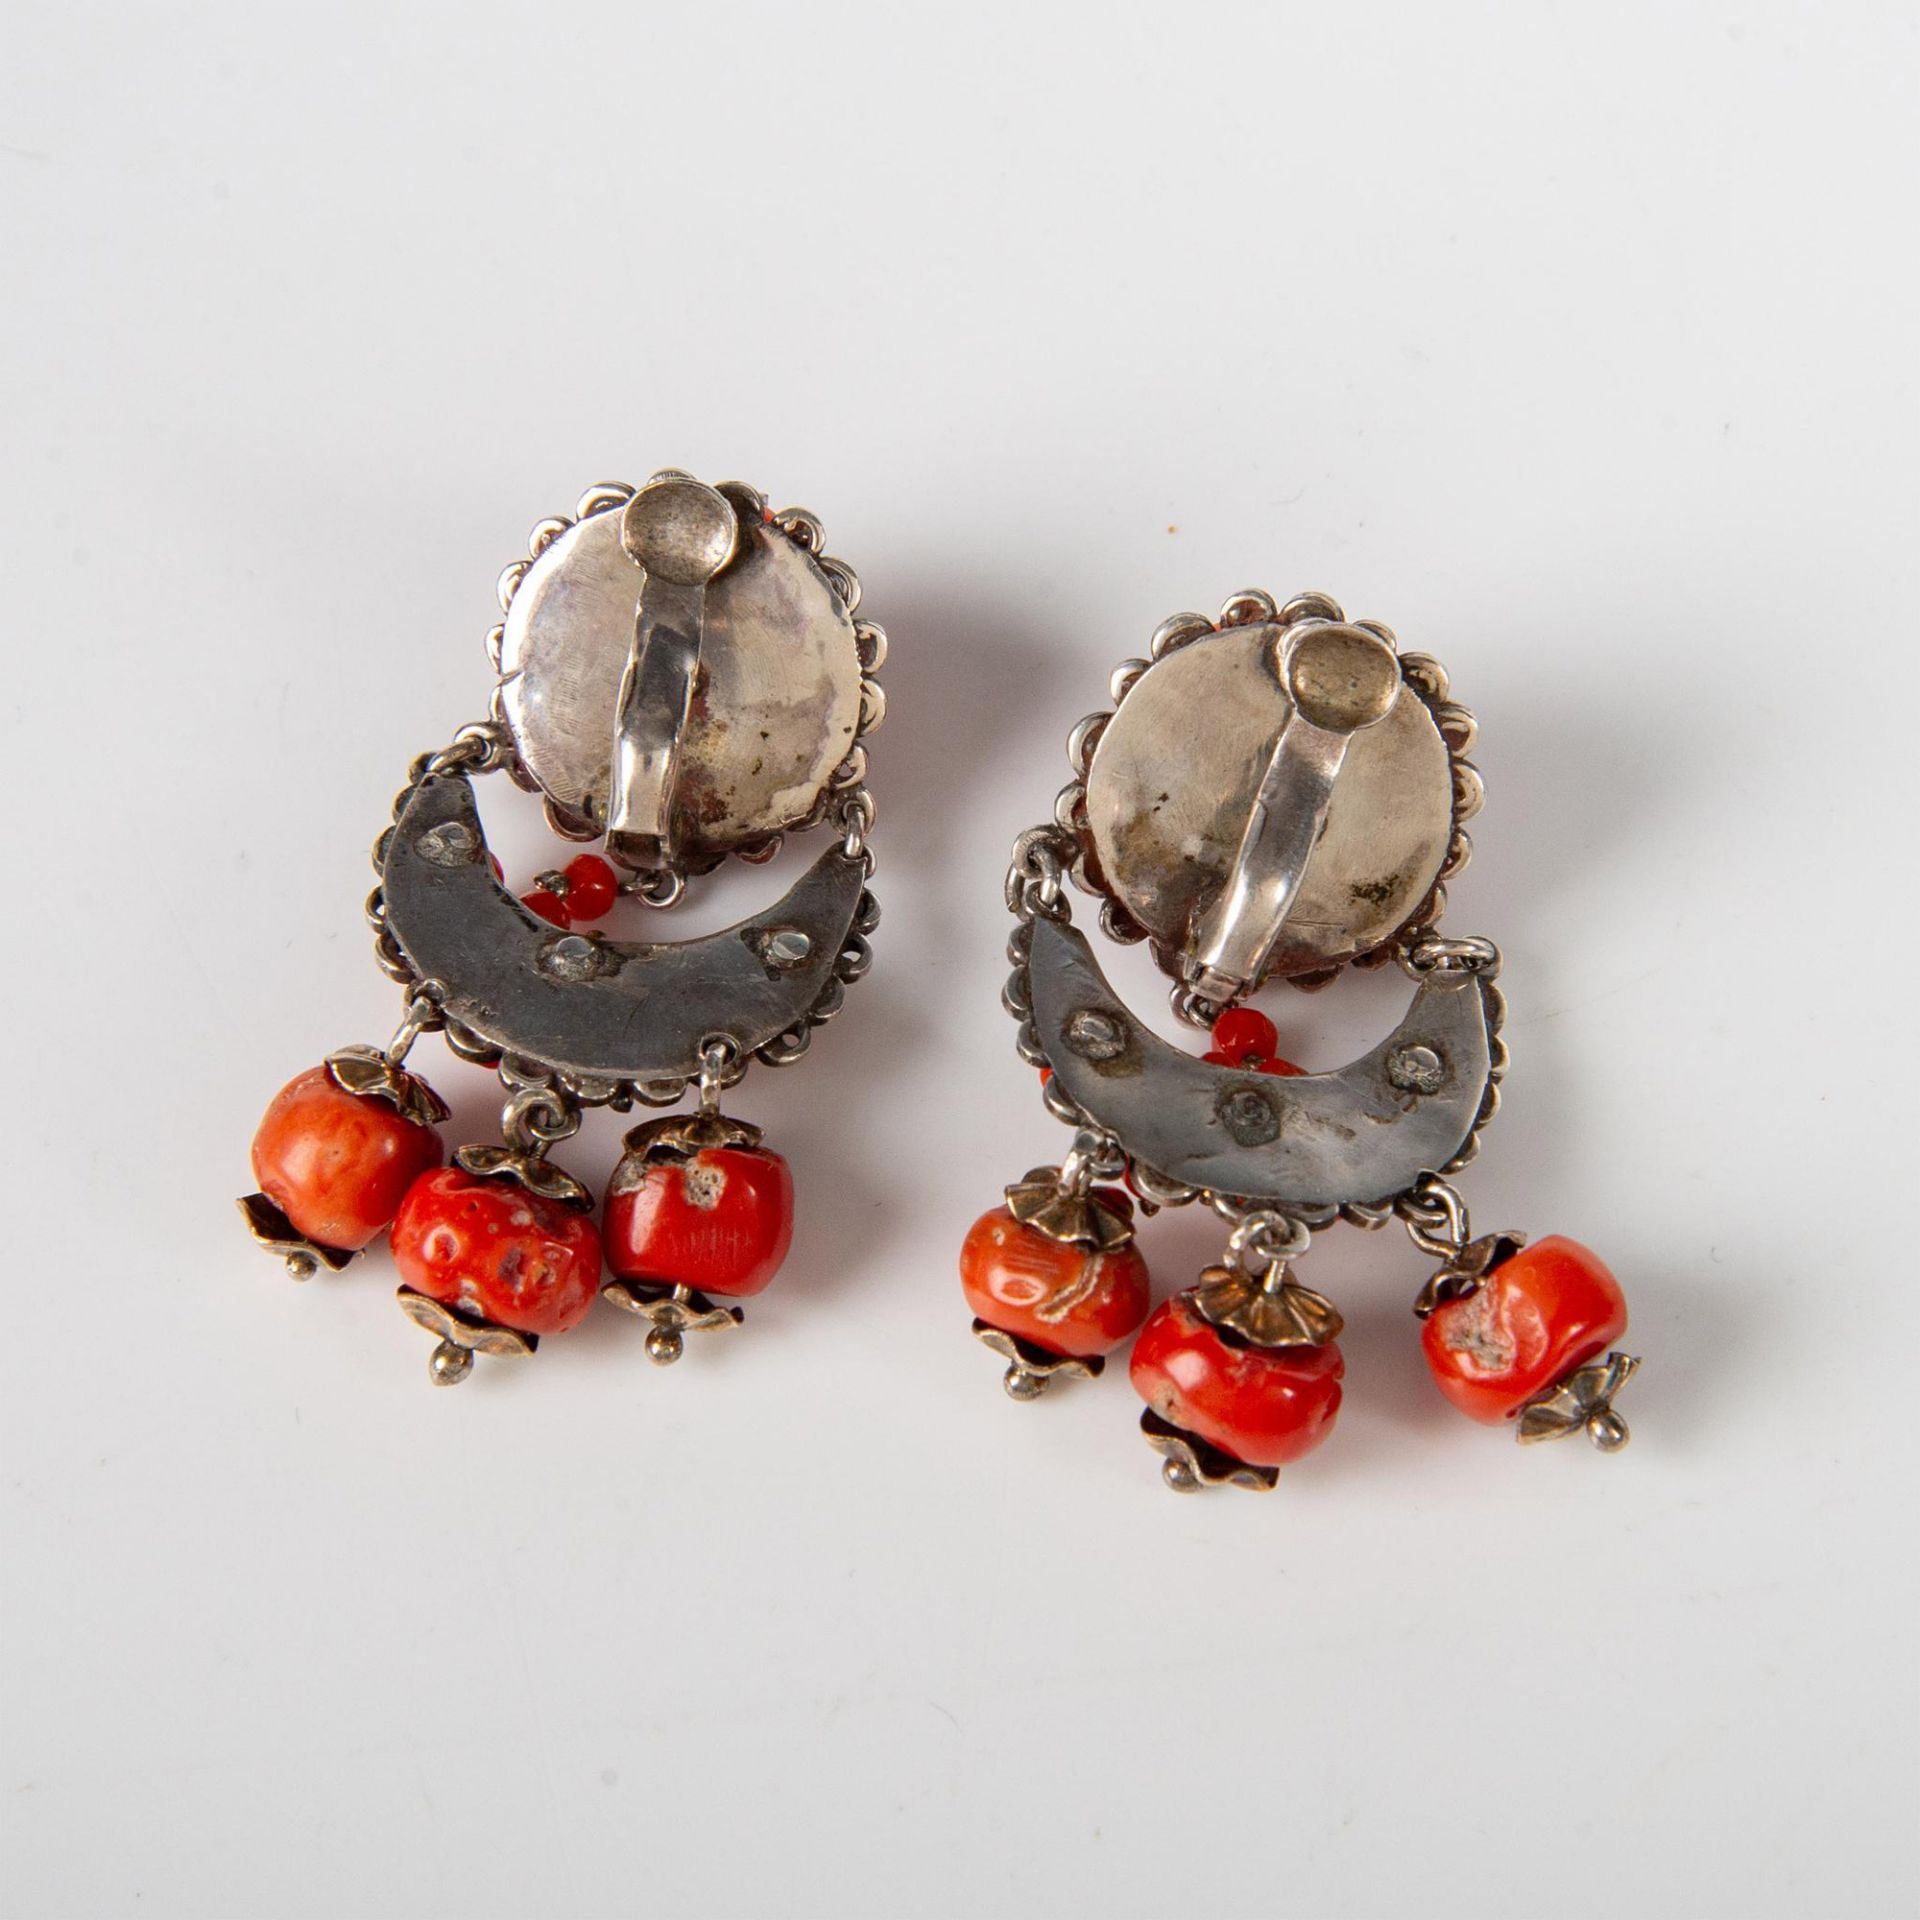 Pair of Silver and Chinese Coral Earrings - Image 6 of 6